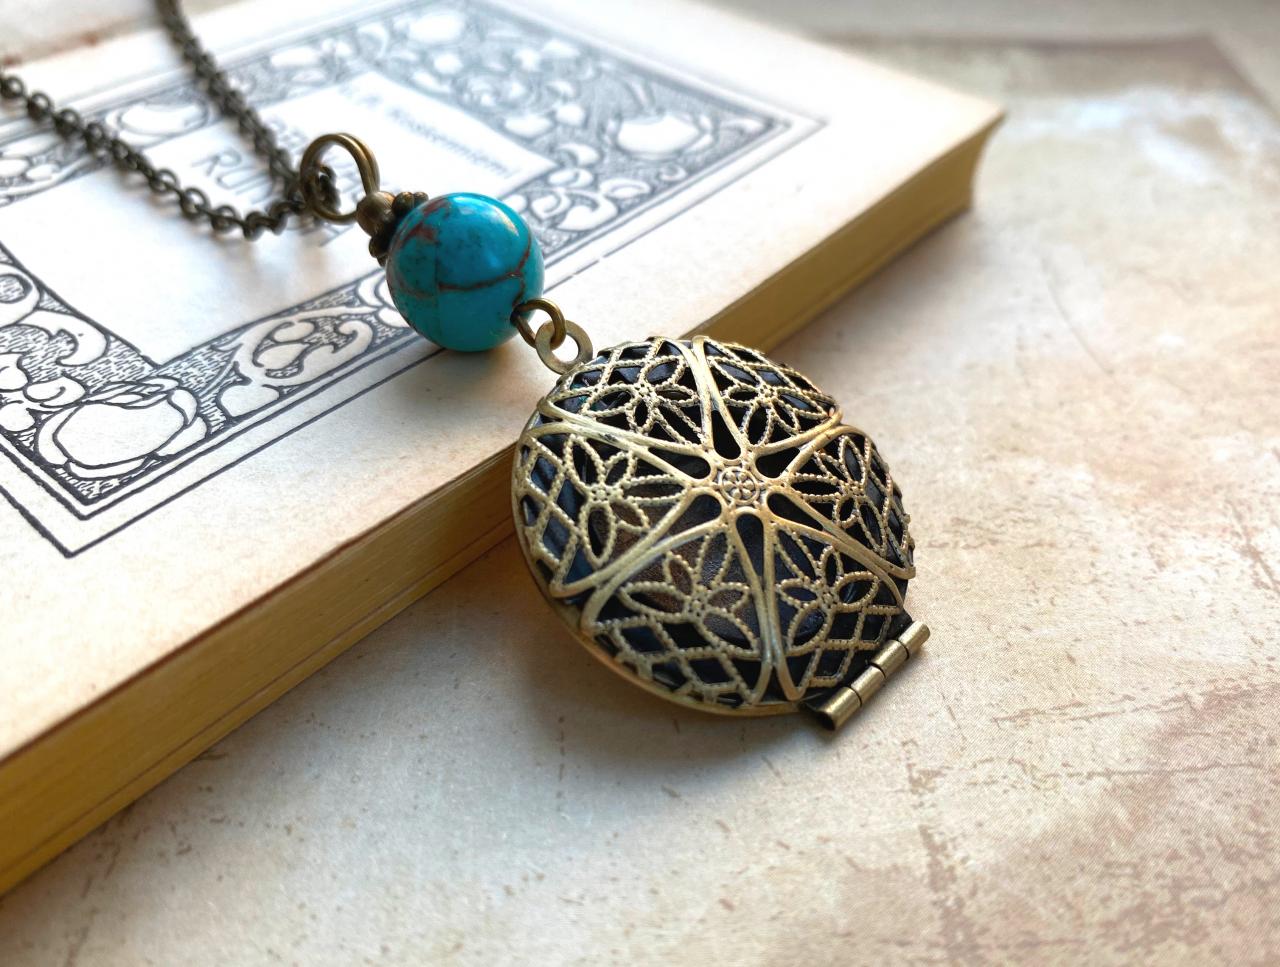 Filigree Locket Necklace With A Turquoise Gemstone Bead, Selma Dreams